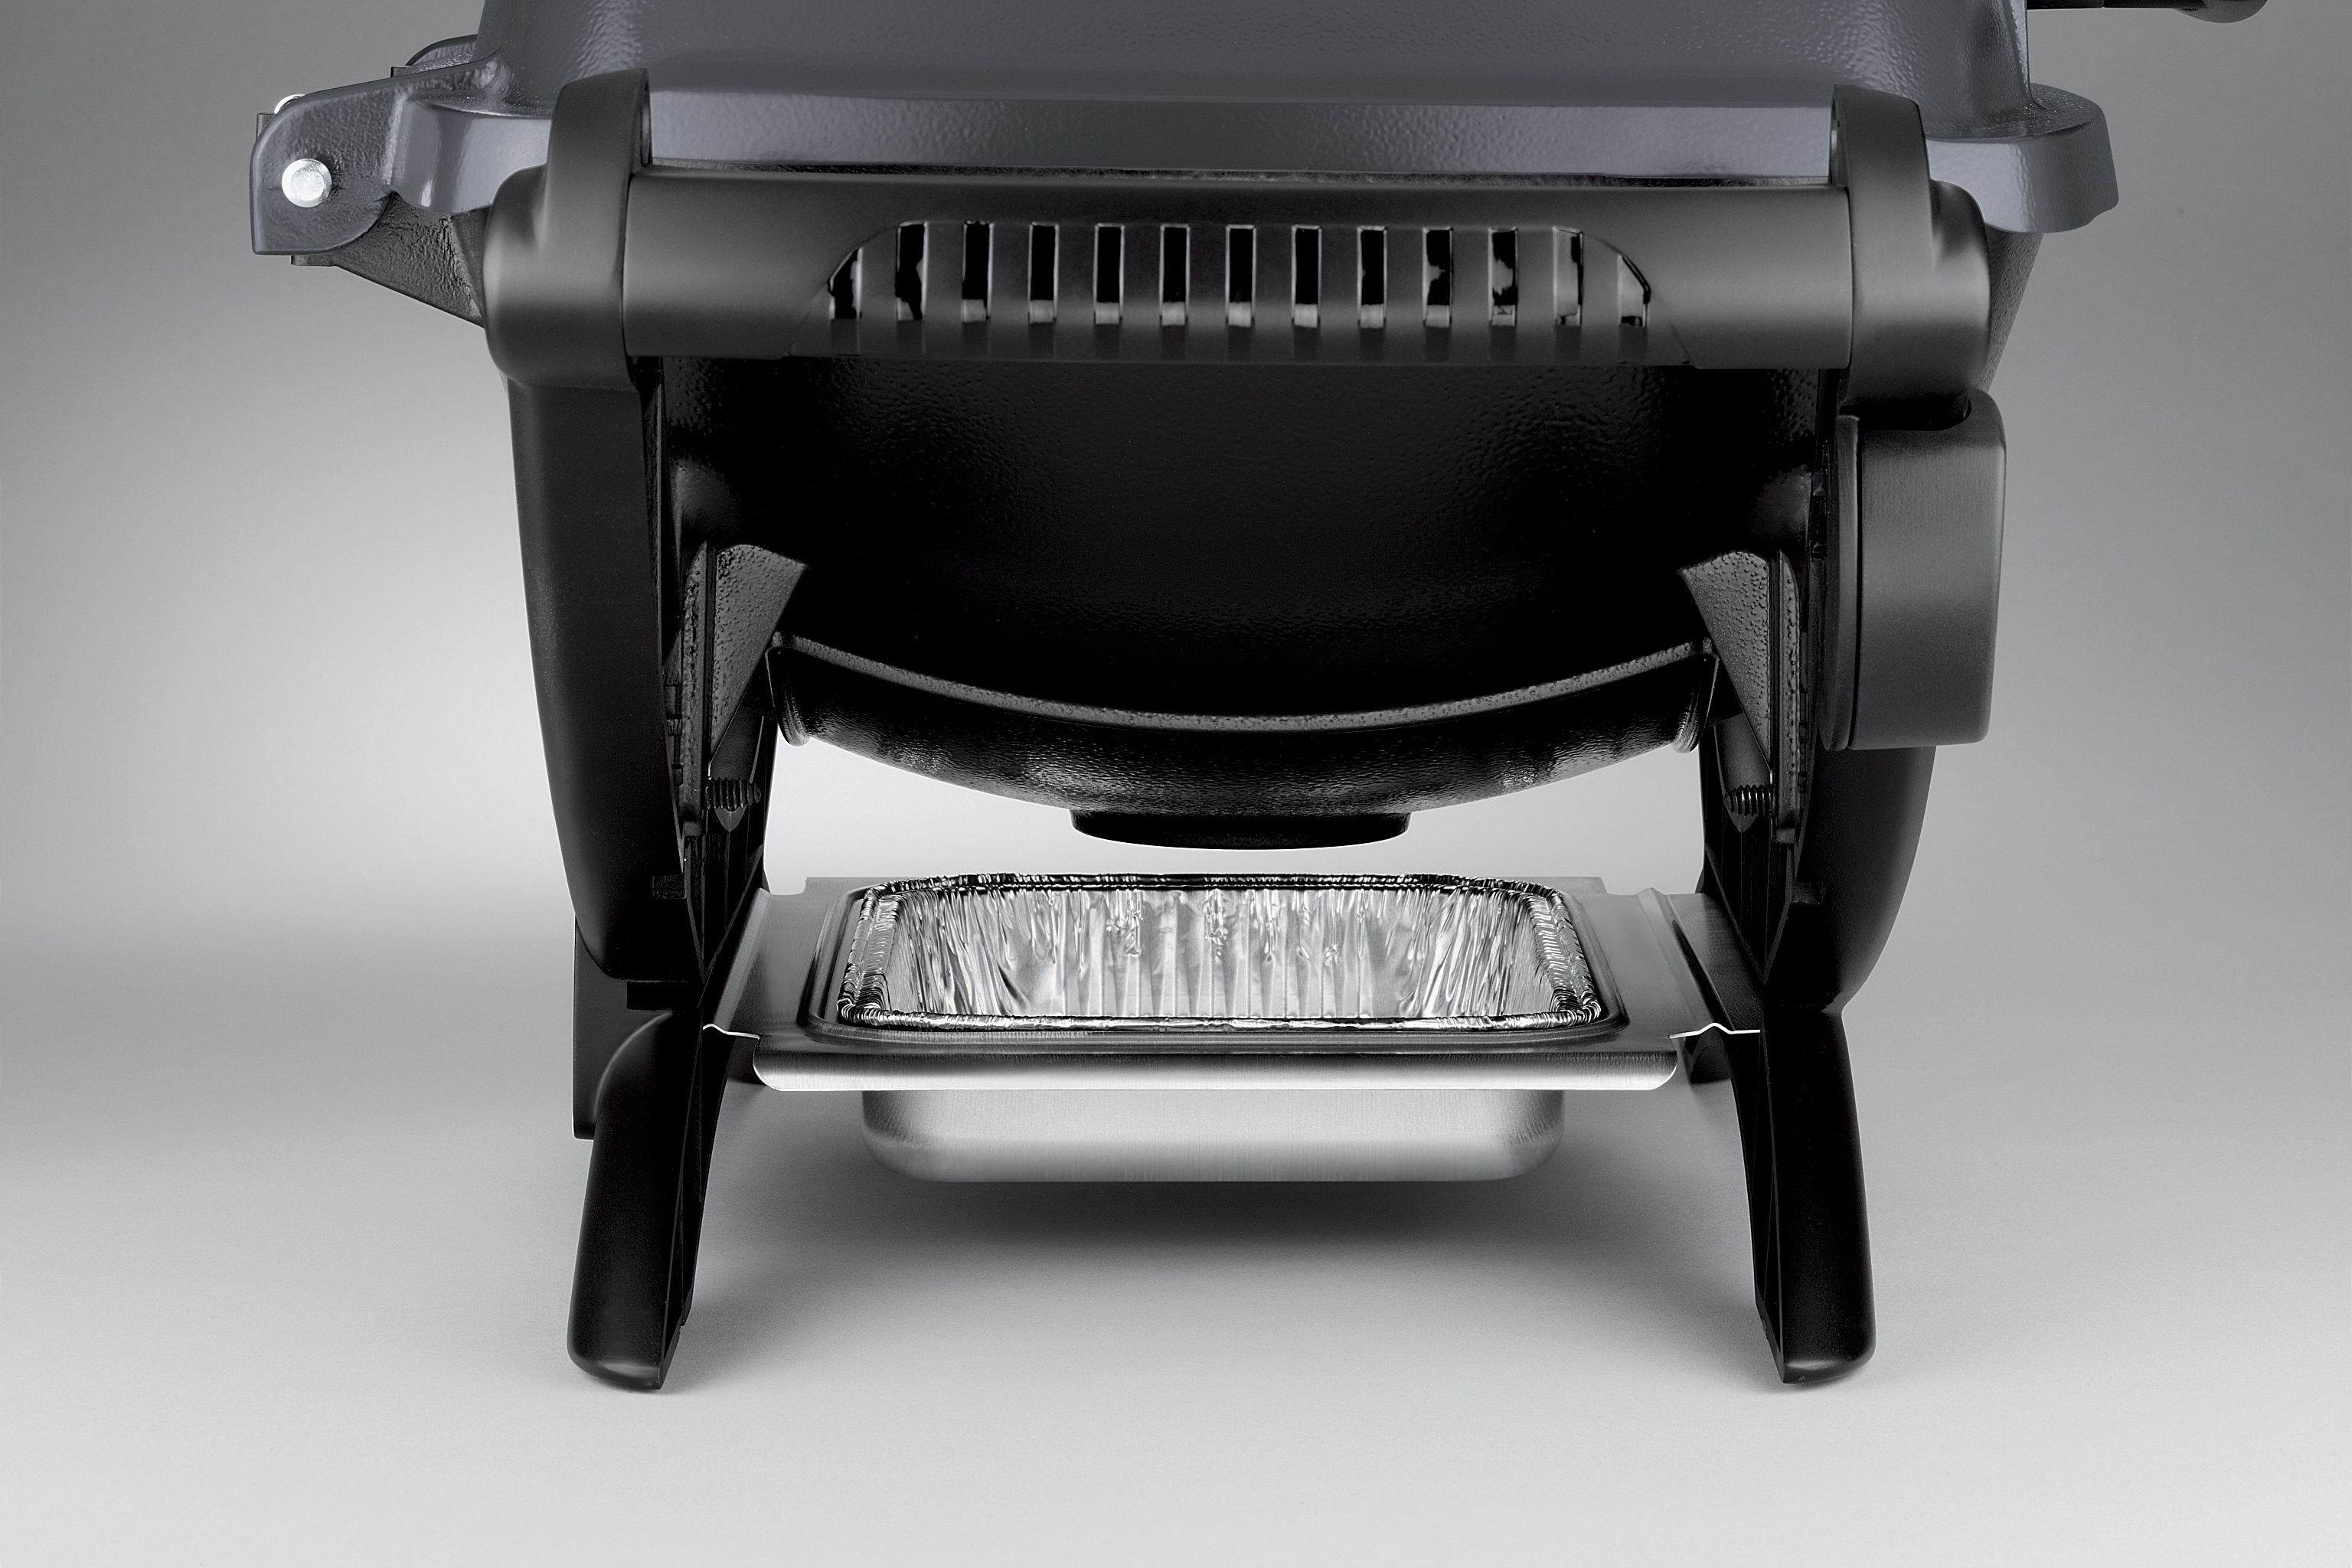 Weber Q1400 Electric Barbecue